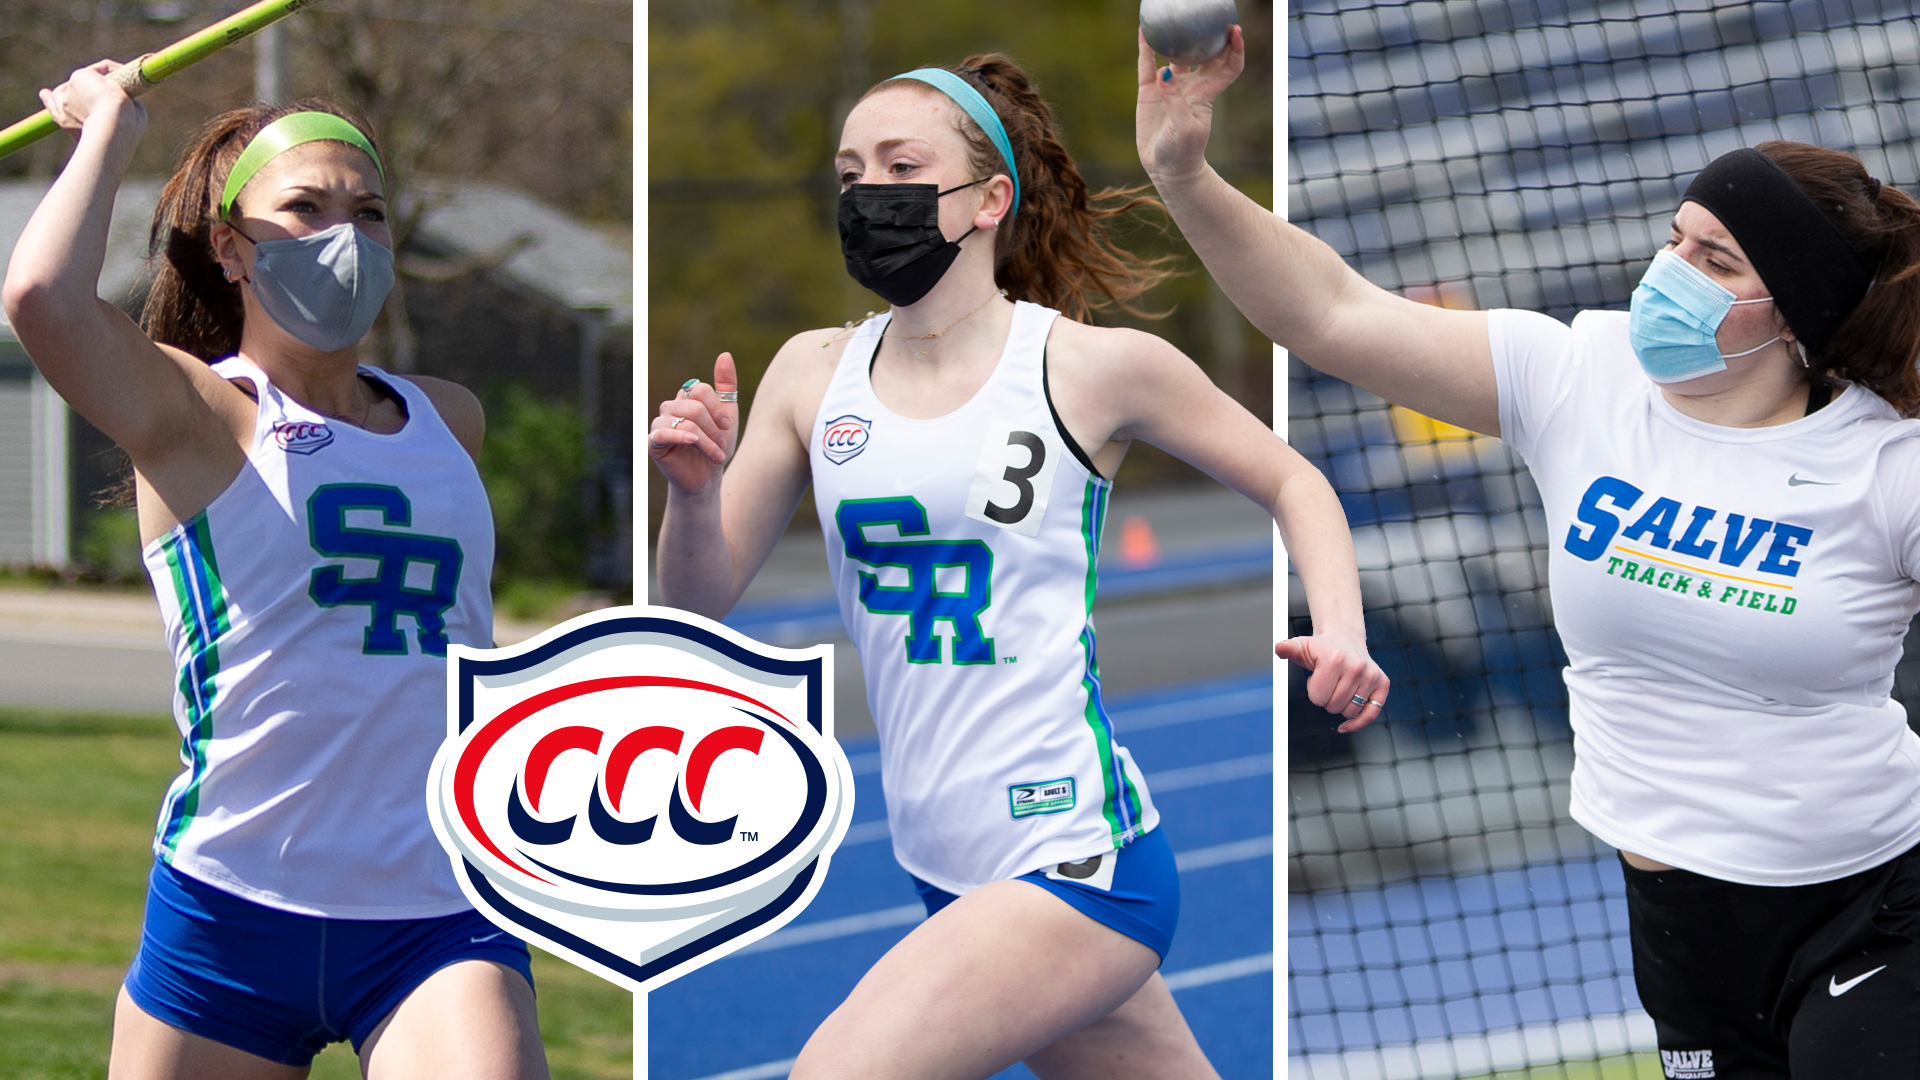 Three Seahawk individuals recognized as All-CCC performers (l to r): Courtney Collibee, Mary Kate Scalzulli, Jenny Silva. (Photos by Jen McGuinness)